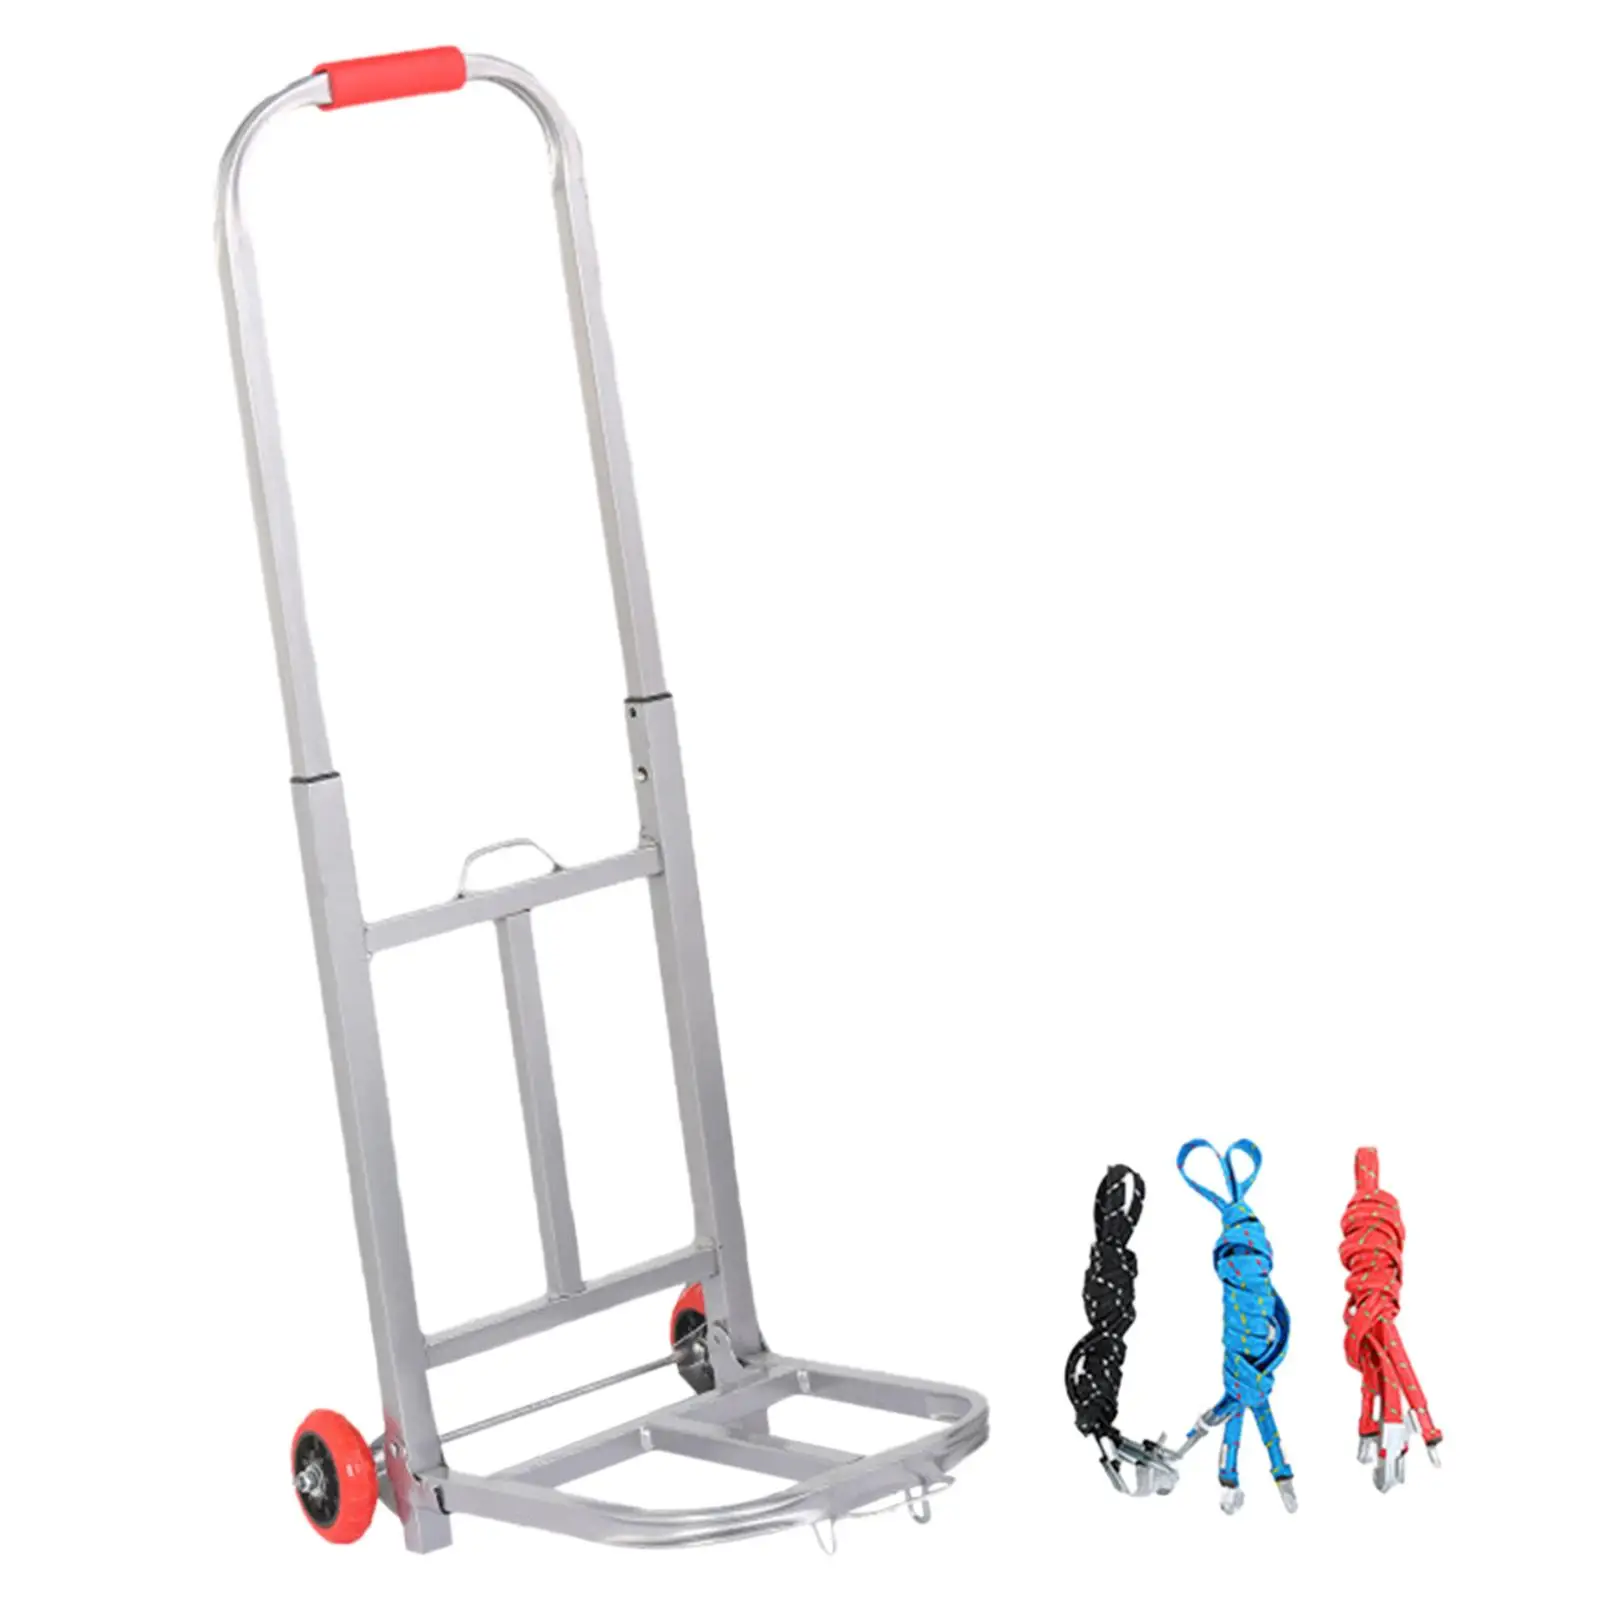 Foldable Folding Hand Truck Luggage Handcart Metal Frame Easily Transport and Storage Sturdy Telescoping Handle for Daily Use